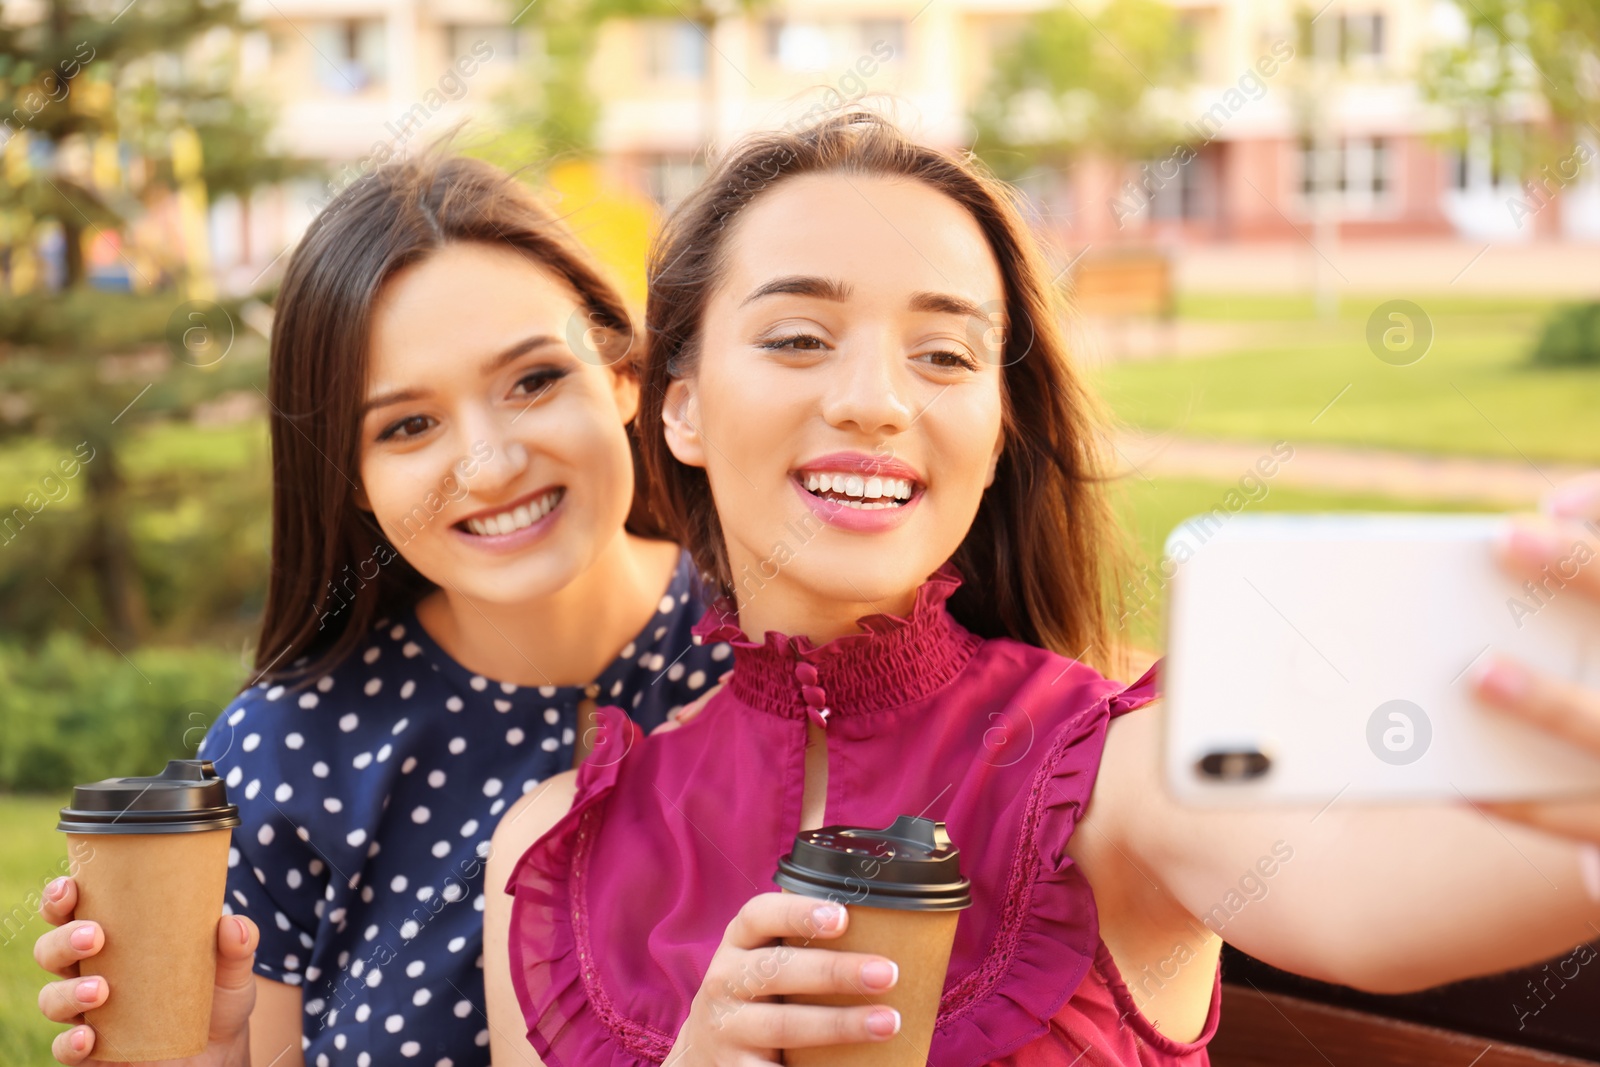 Photo of Young women with cups of coffee taking selfie outdoors